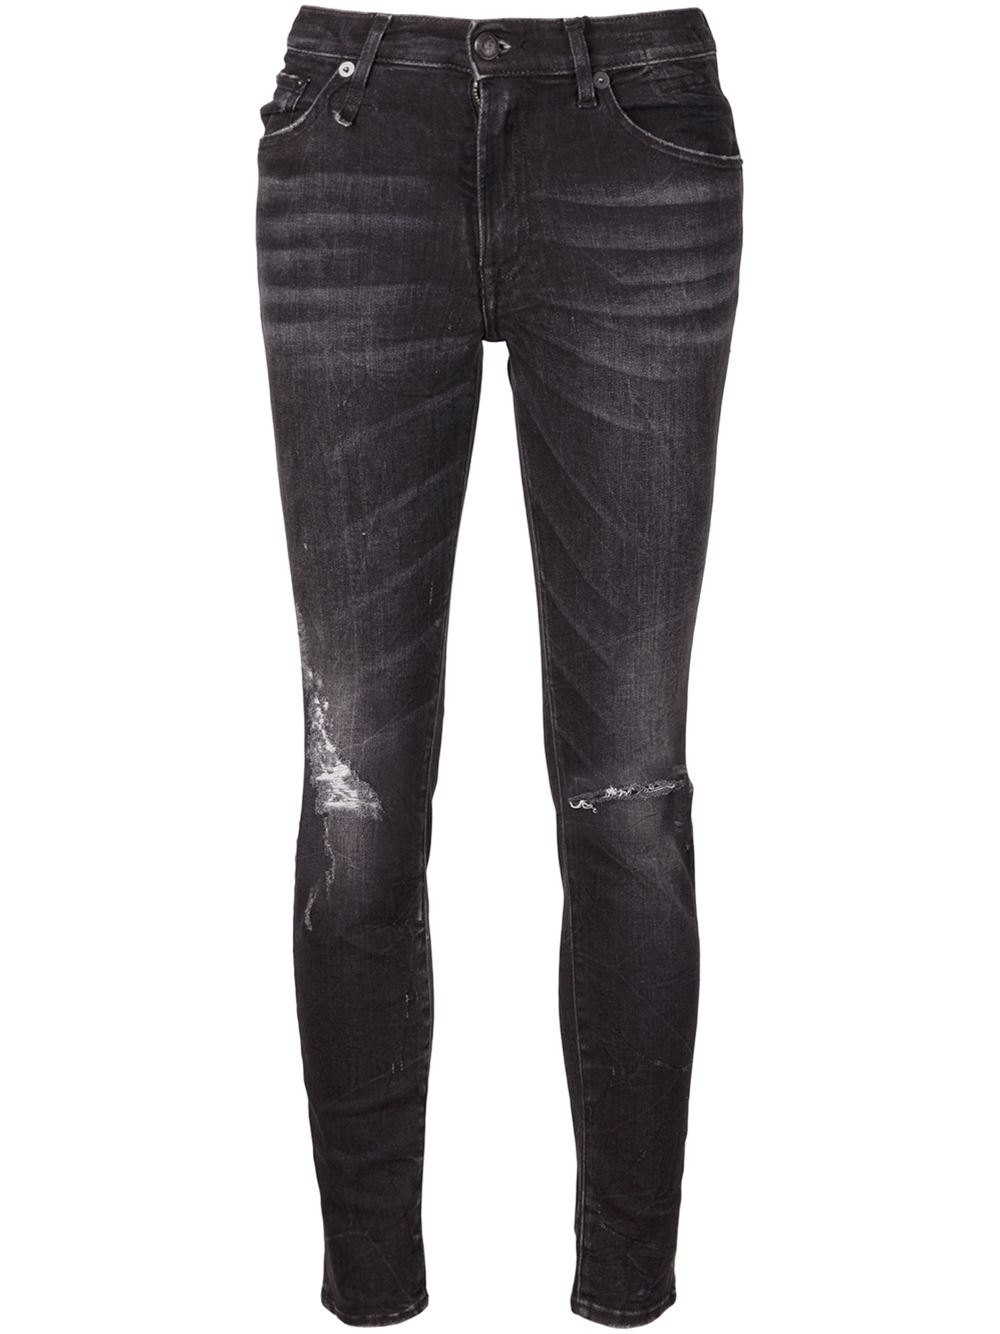 Lyst - R13 Distressed High Rise Jeans in Black